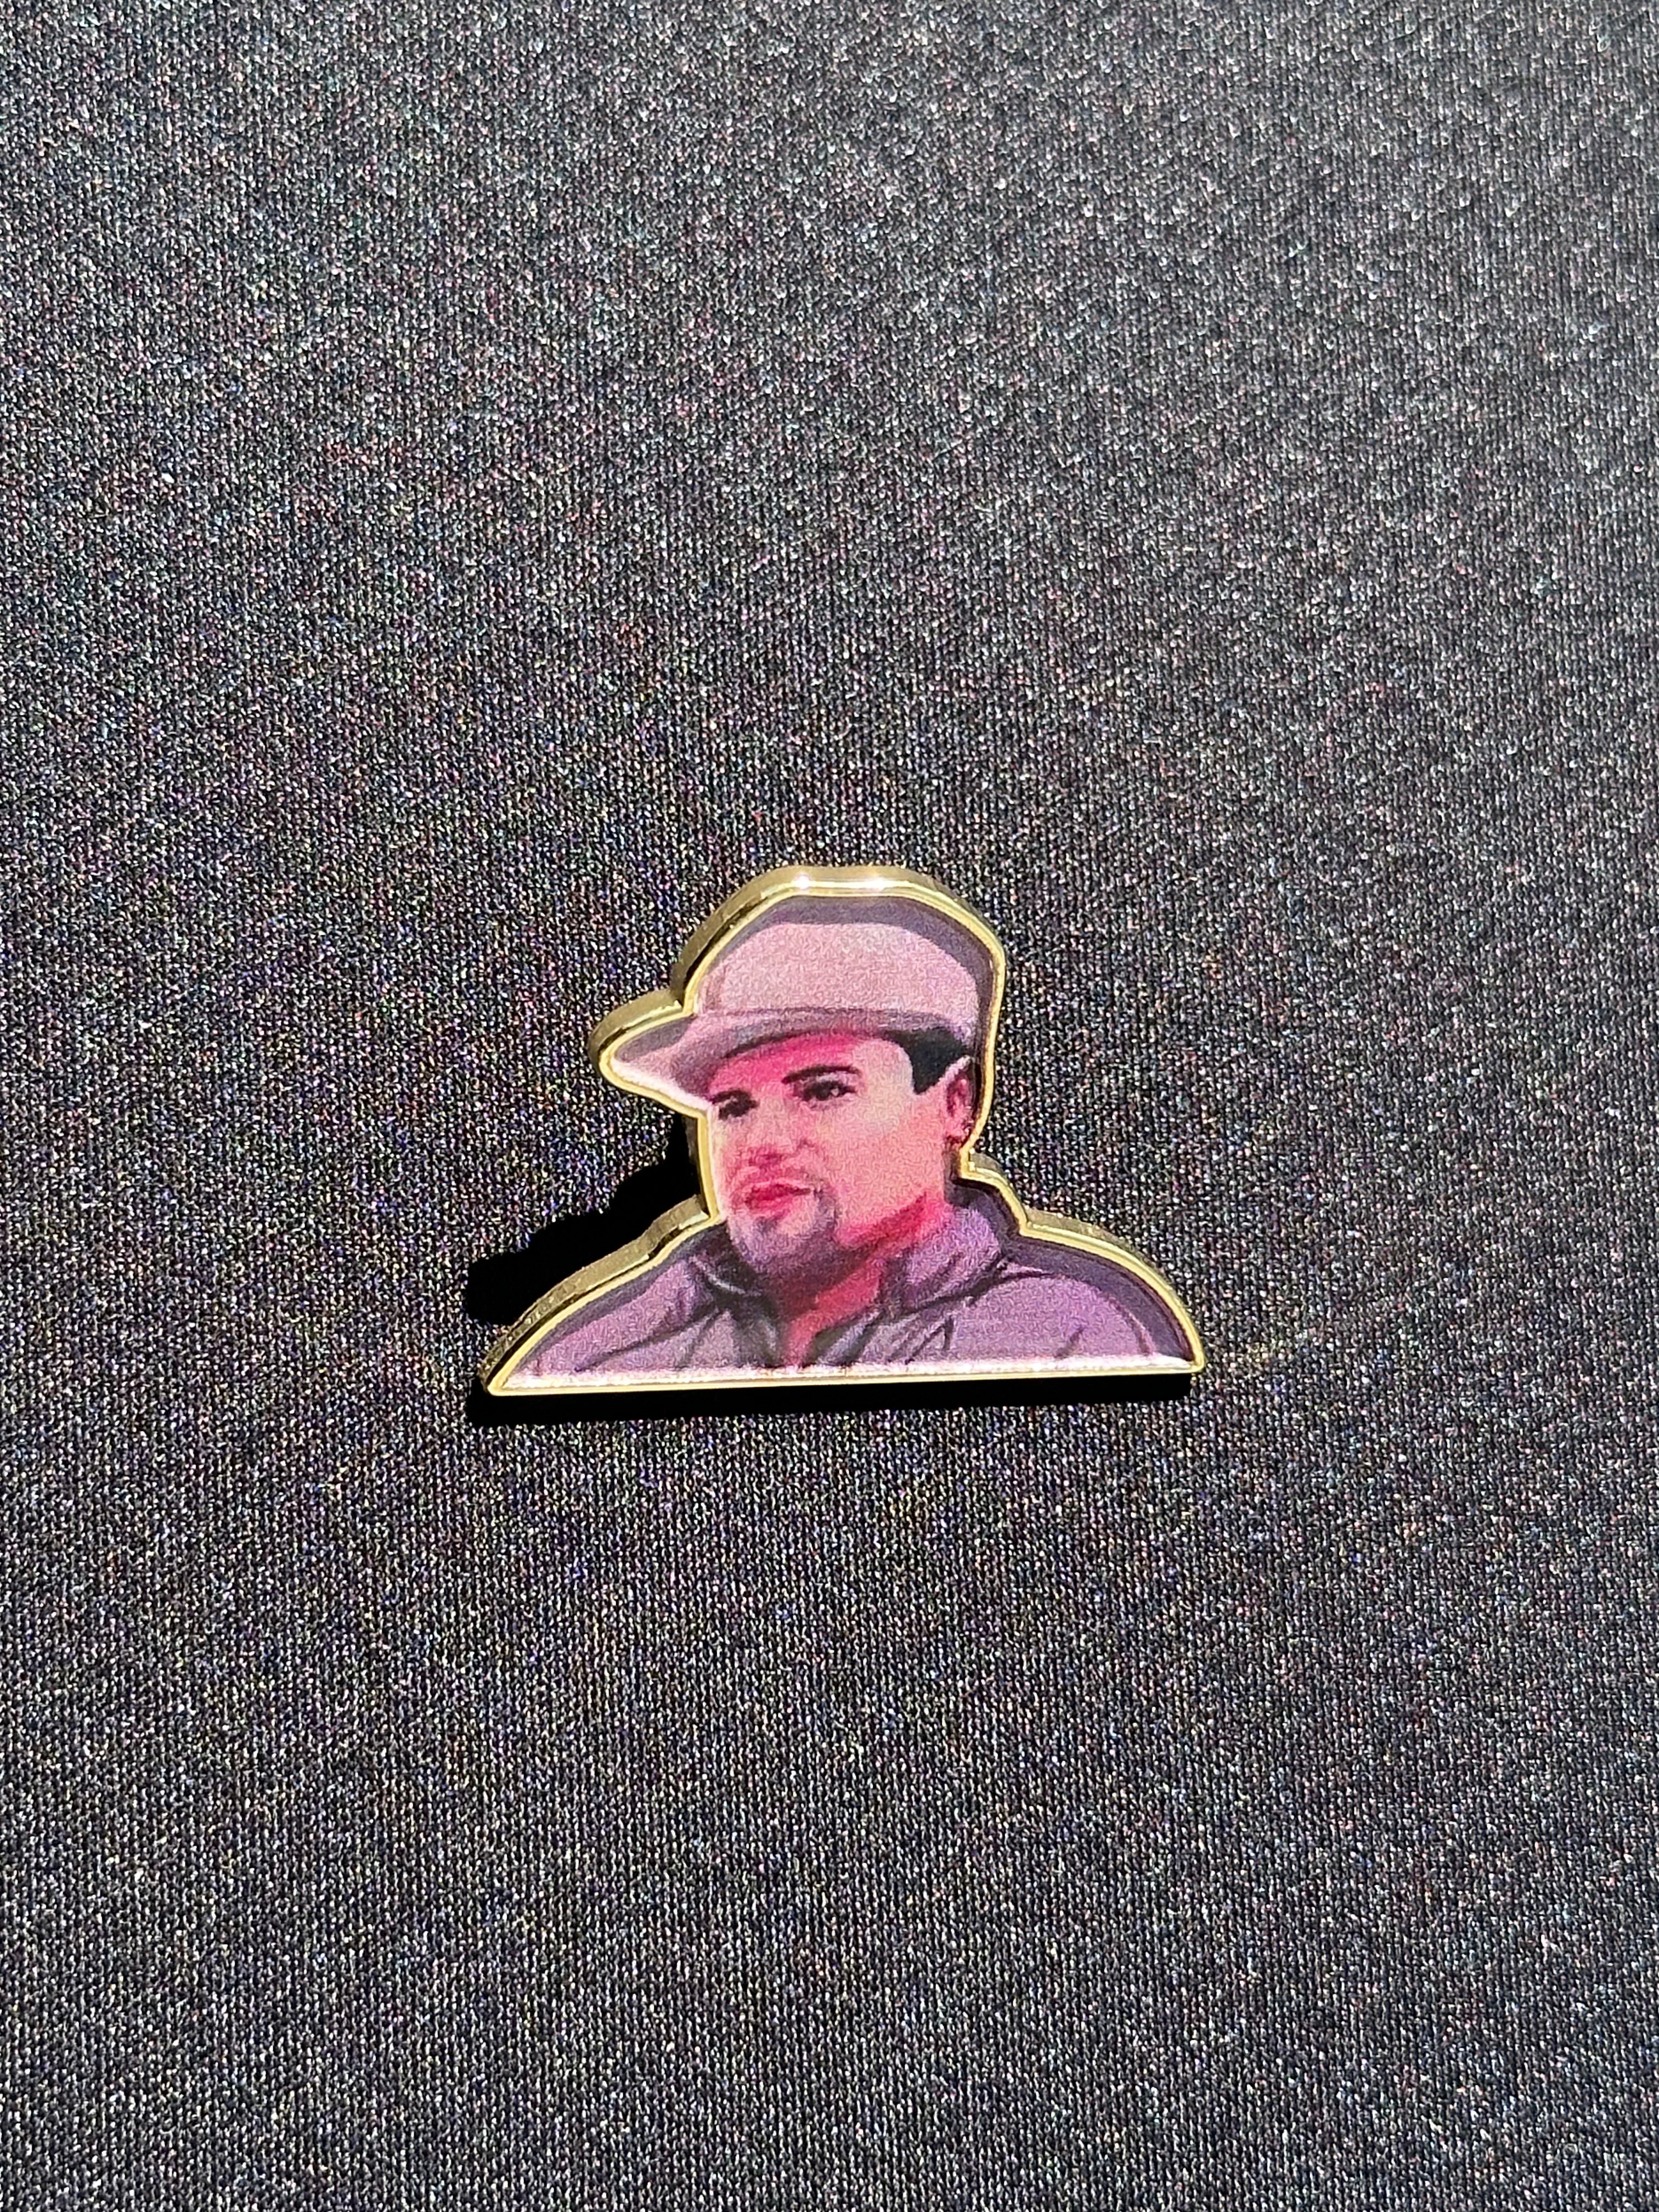 *NEW "EL CHAPO" MUGSHOT EXCLUSIVE PIN VERY LIMITED